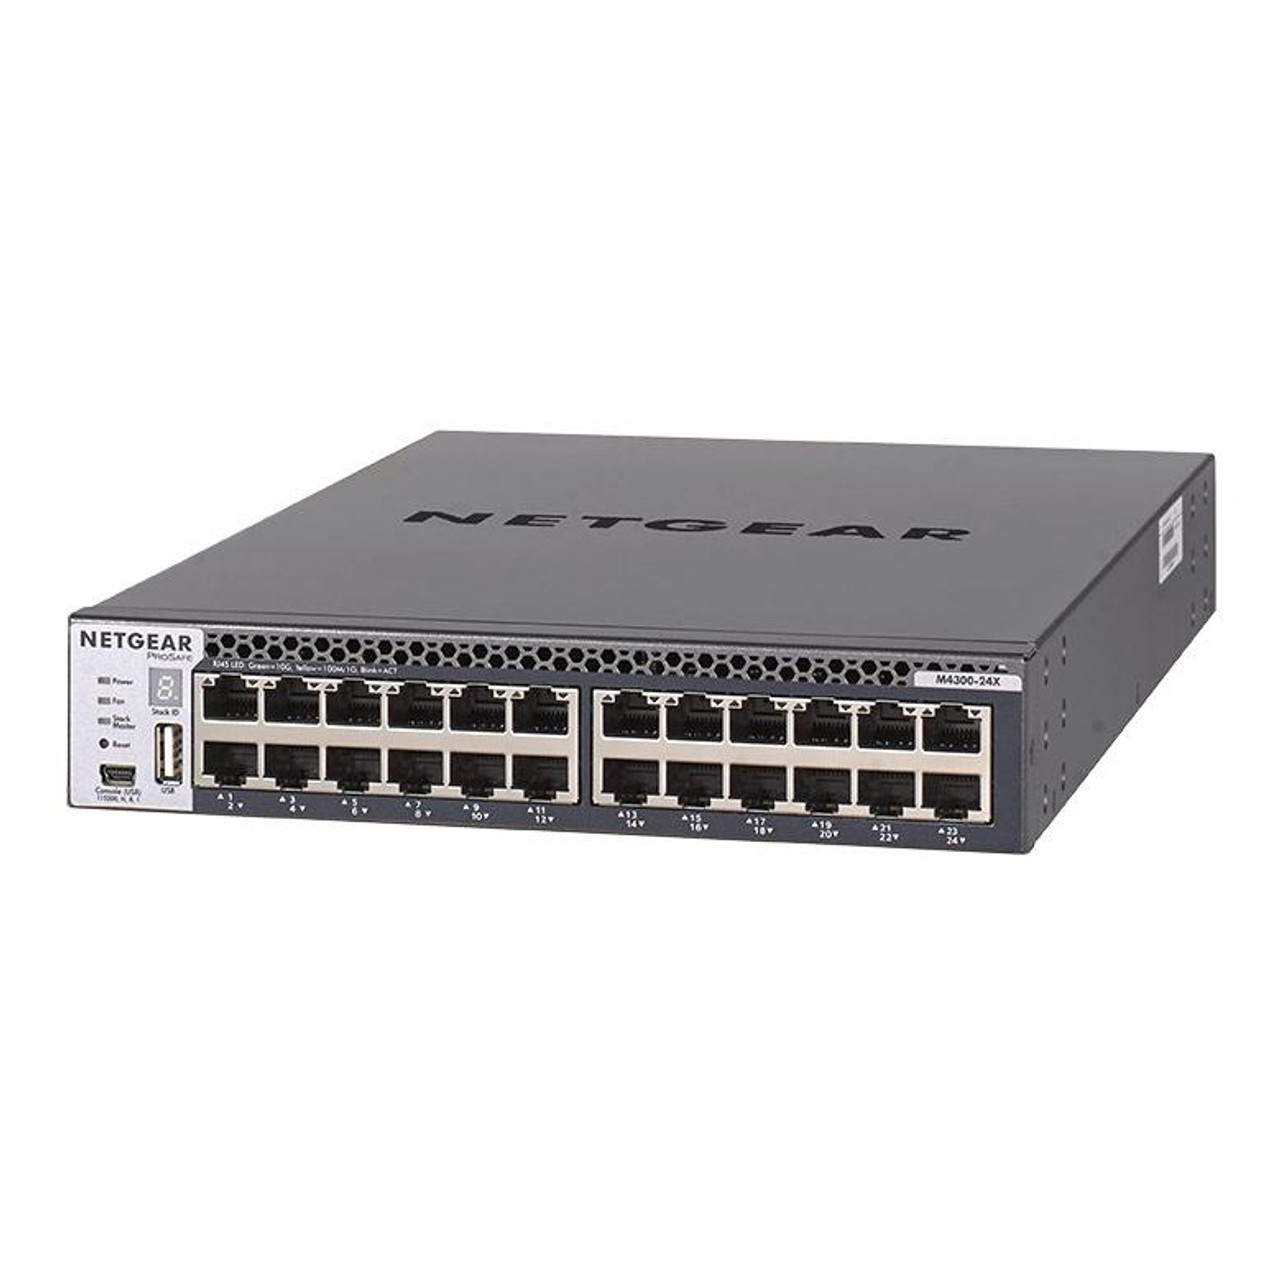 Netgear M4300-24X 24x10G Layer 3 Stackable Managed Switch with 4x10G SFP